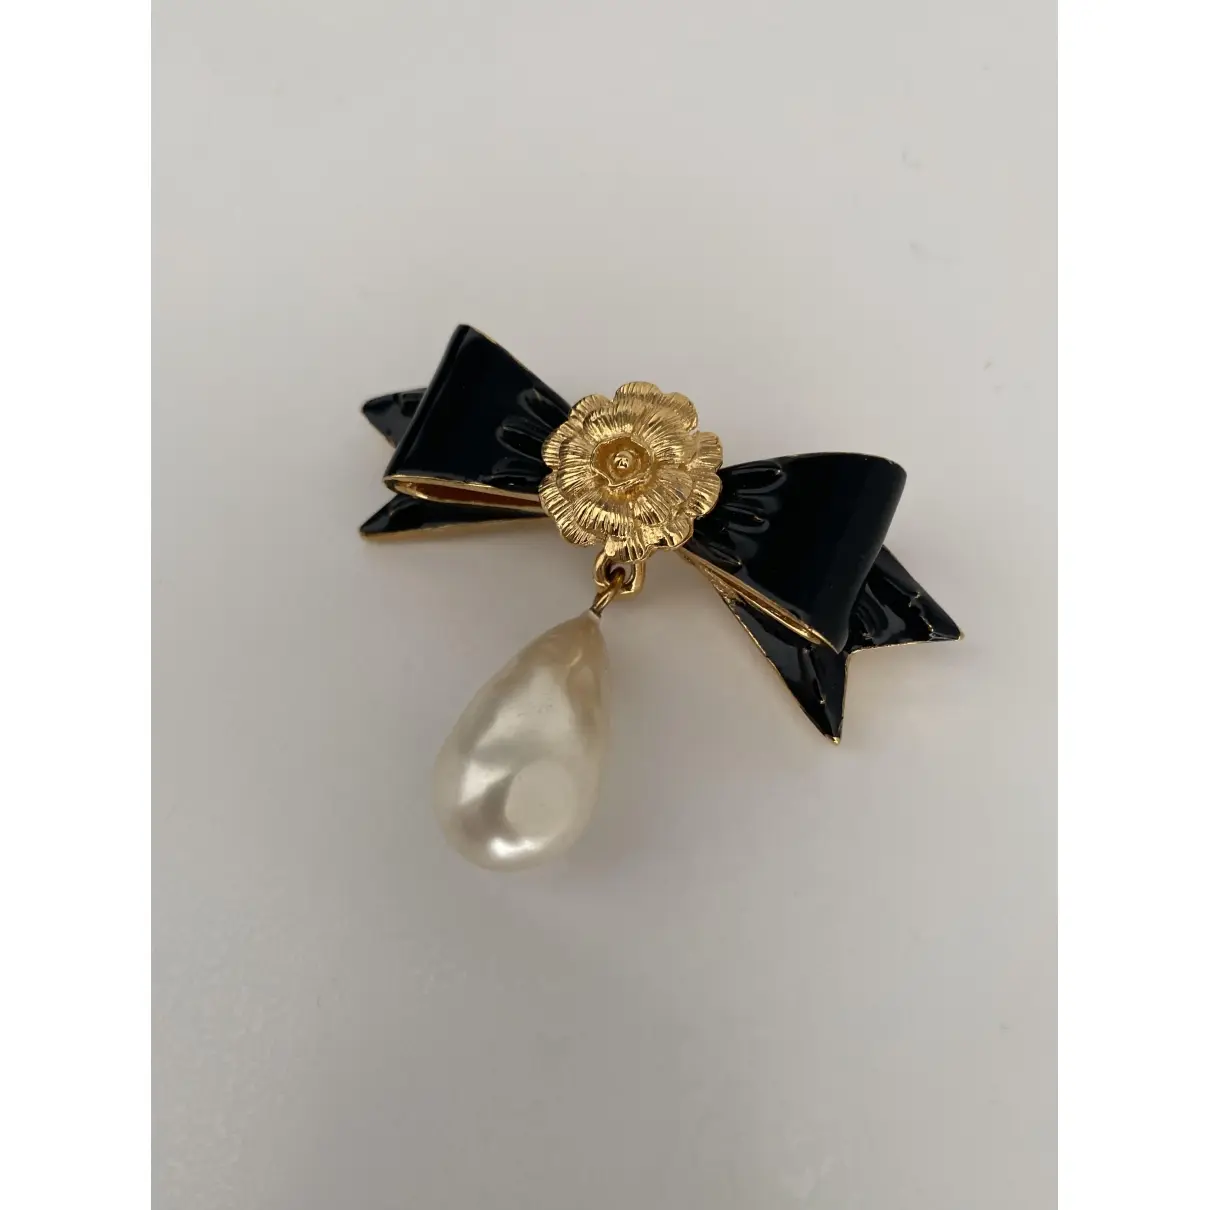 Buy Chanel Pin & brooche online - Vintage